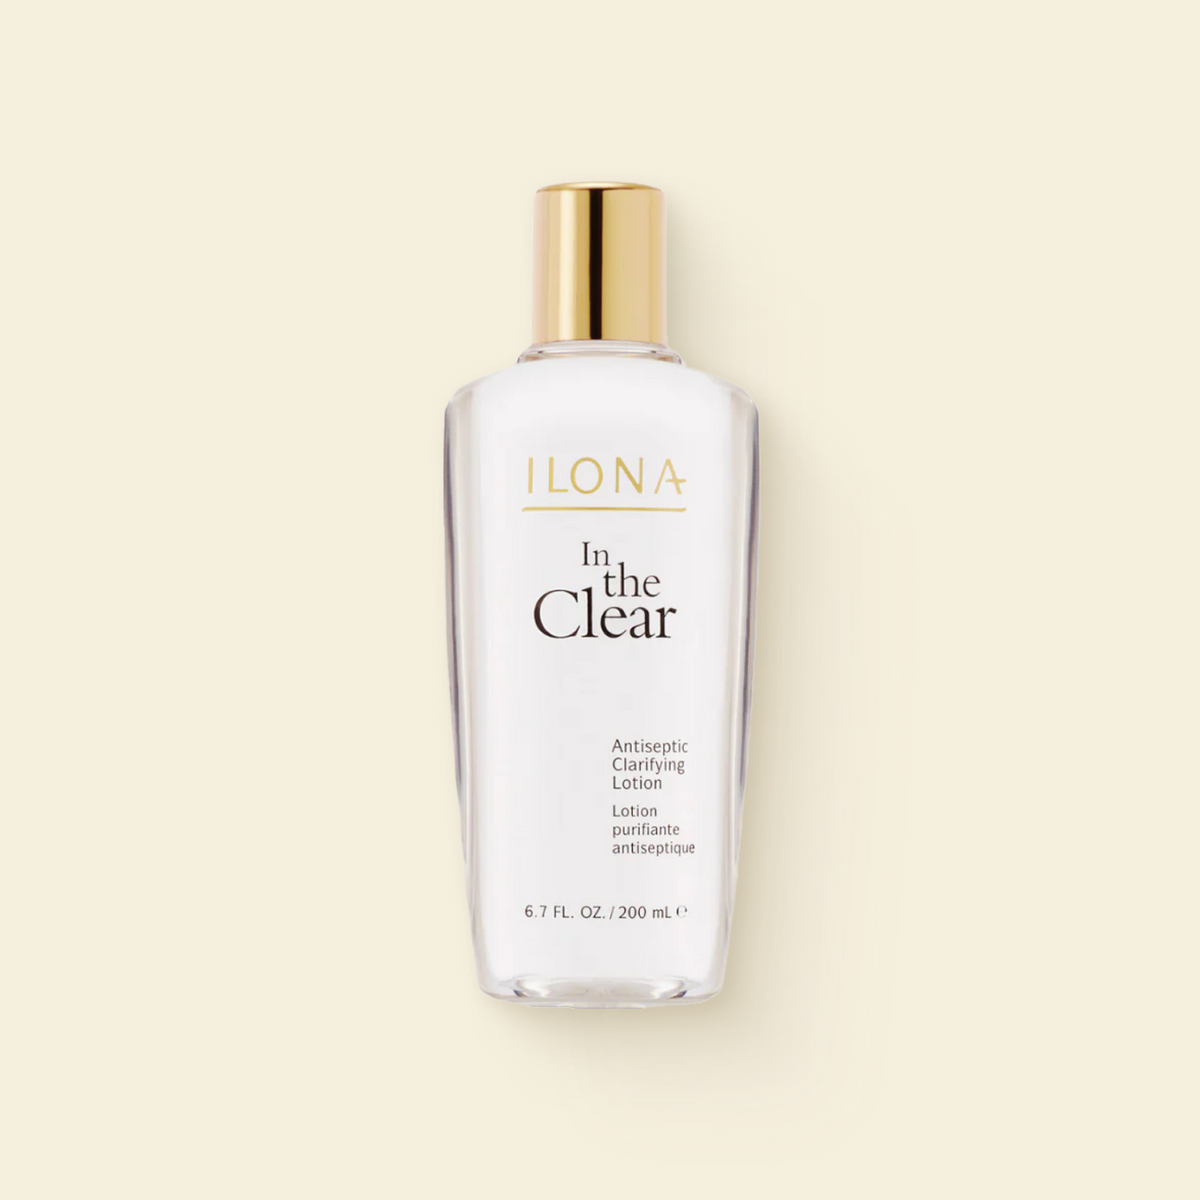 In the Clear Antiseptic Clarifying Lotion